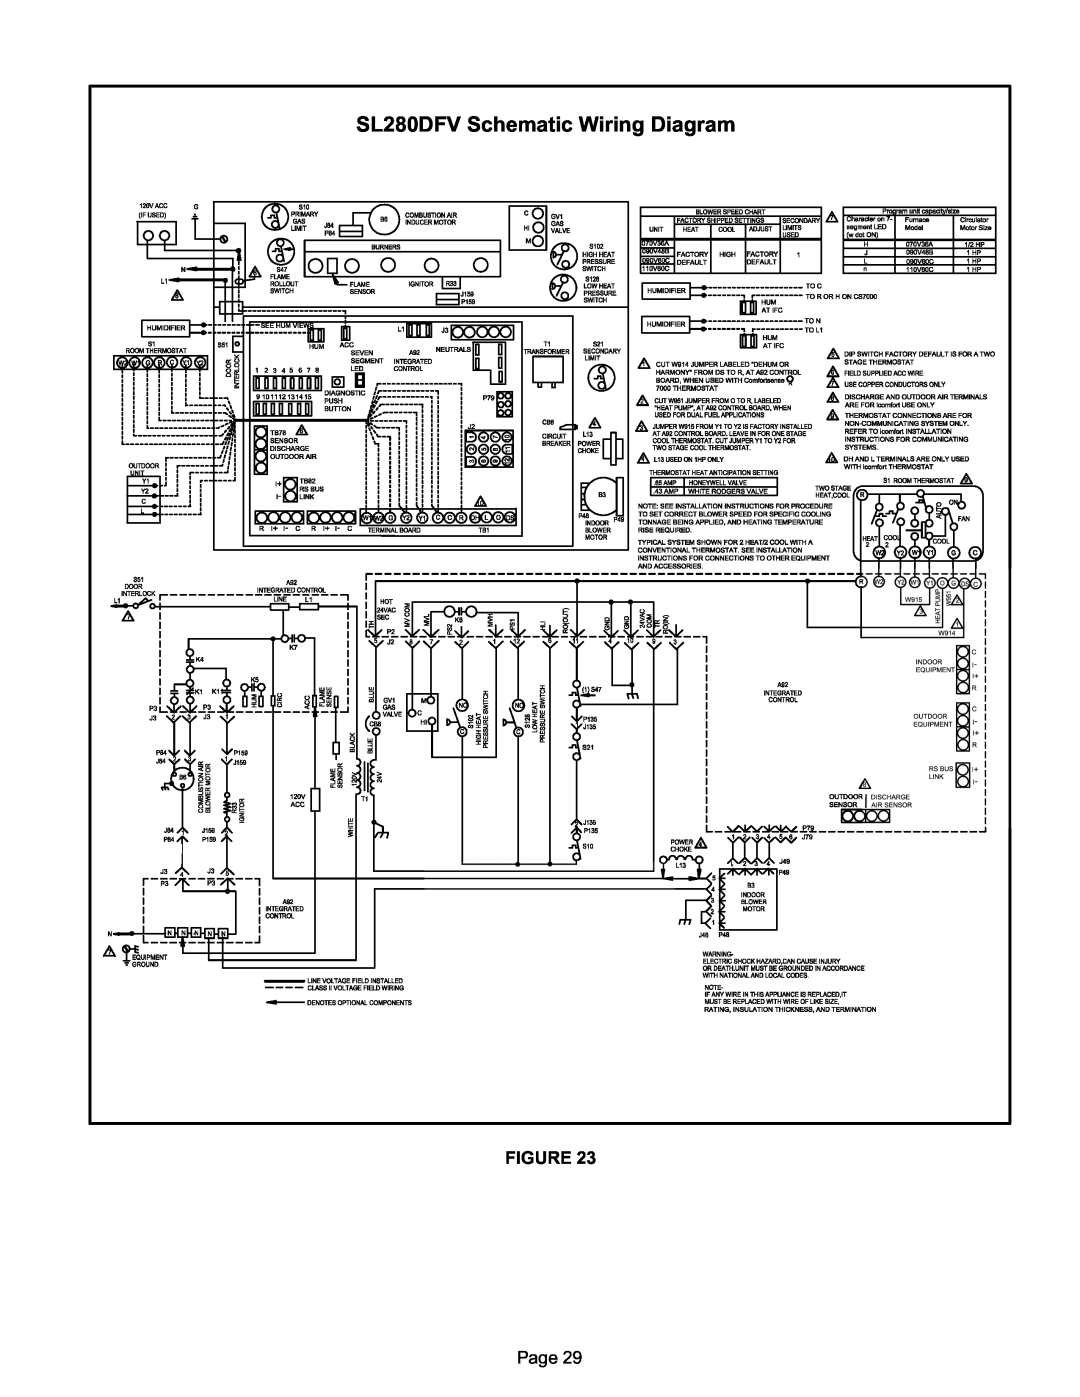 Lennox International Inc DAVE LENNOX SIGNATURE COLLECTION GAS FURNACE SL280DFV Schematic Wiring Diagram, FIGURE Page 